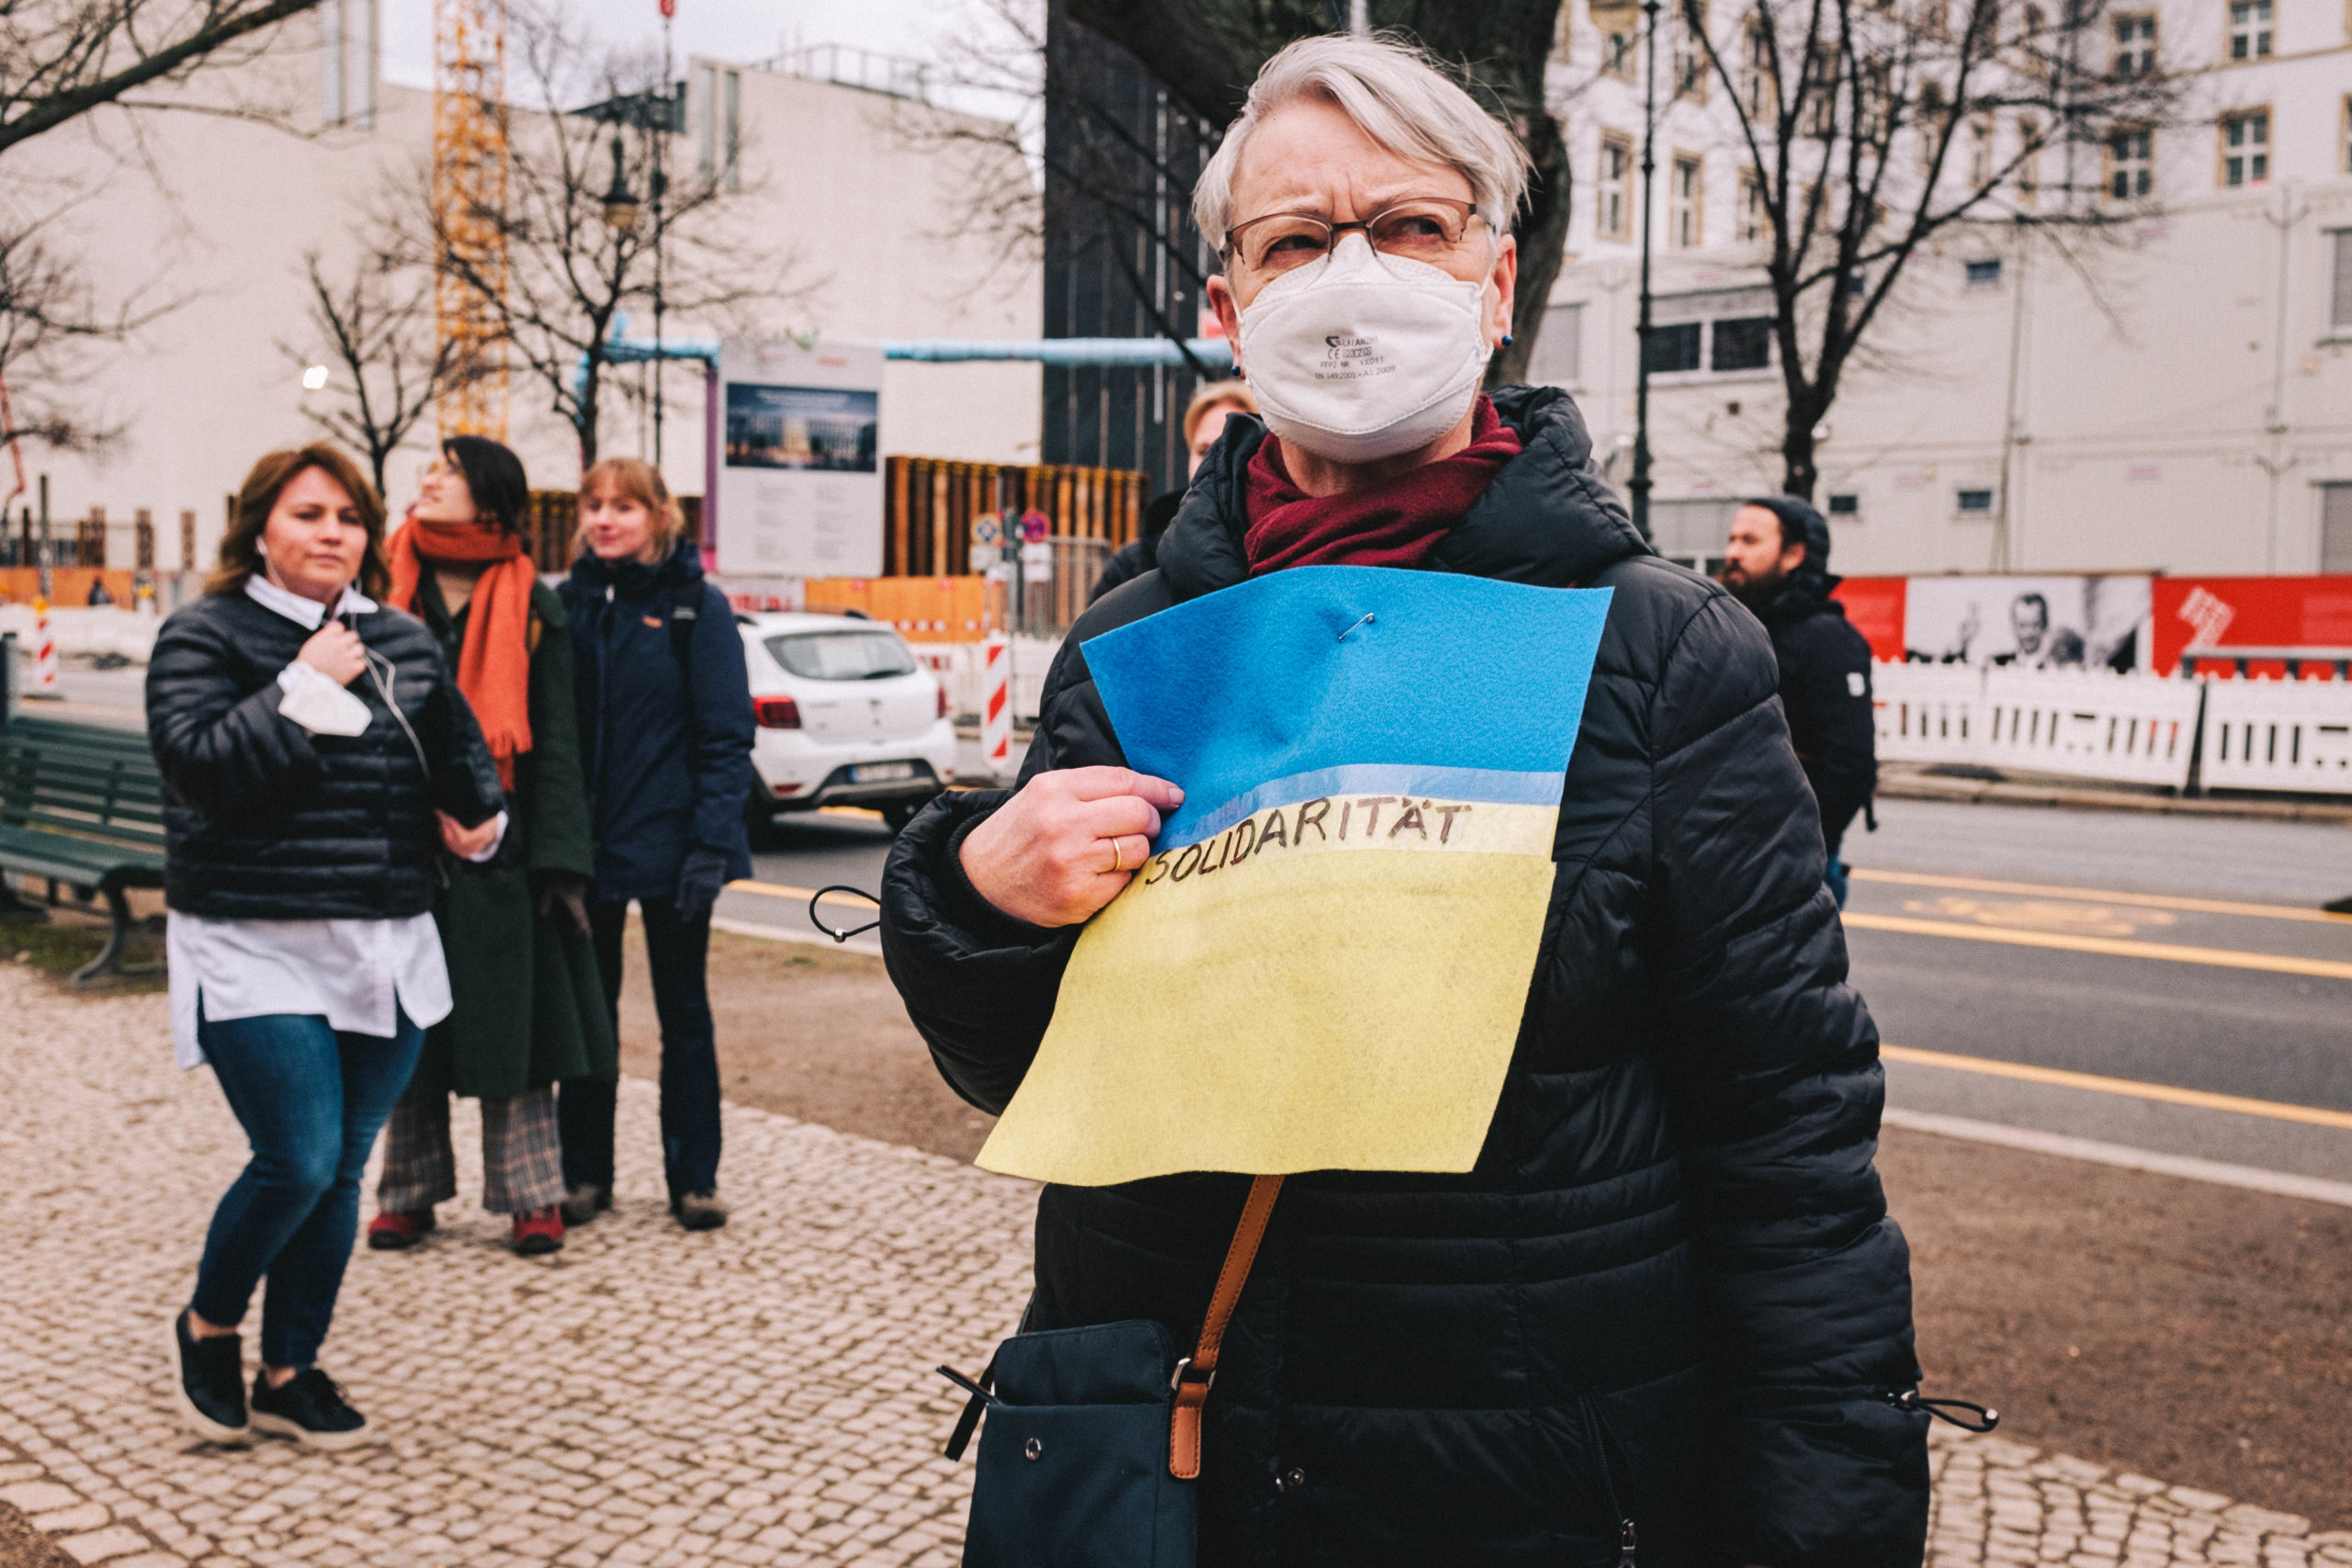 A protester outside the russian embassy in Berlin expressing her solidarity